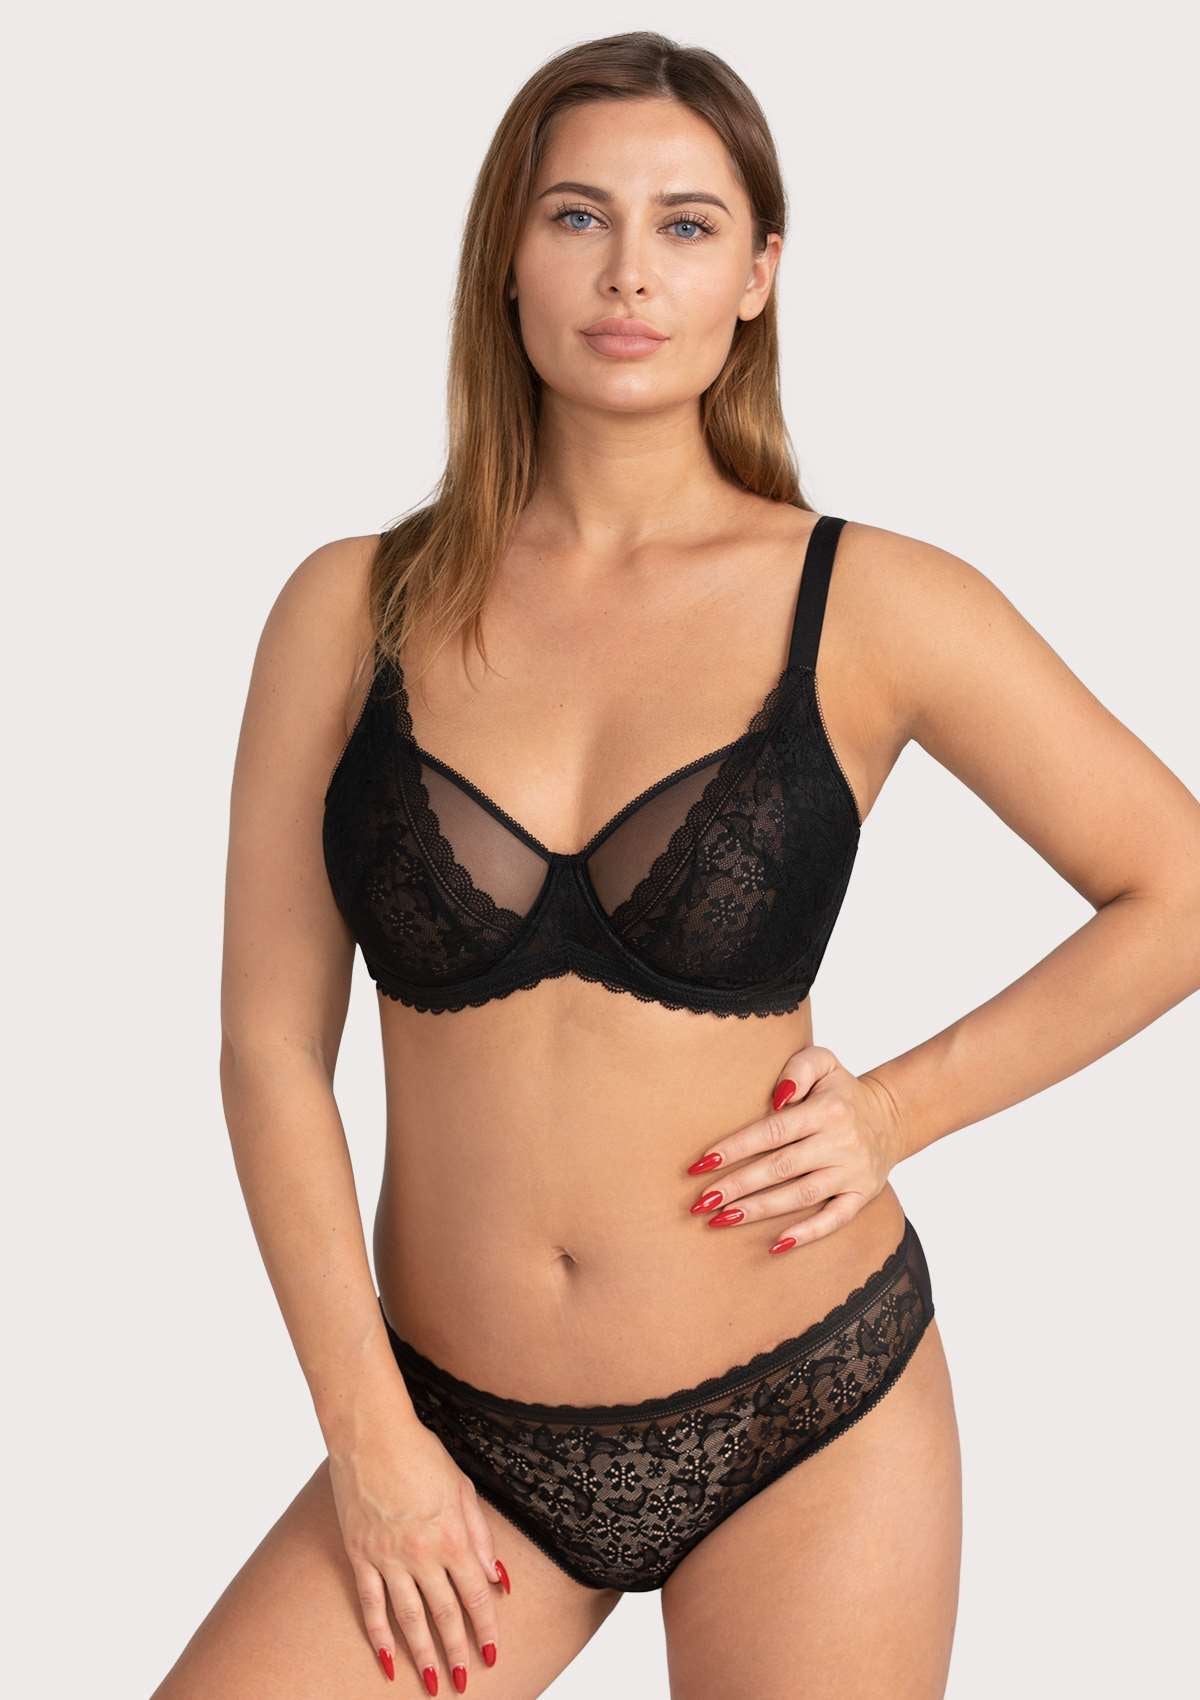 HSIA Anemone Lace Bra And Panties: Back Support Wired Bra - Black / 34 / DDD/F